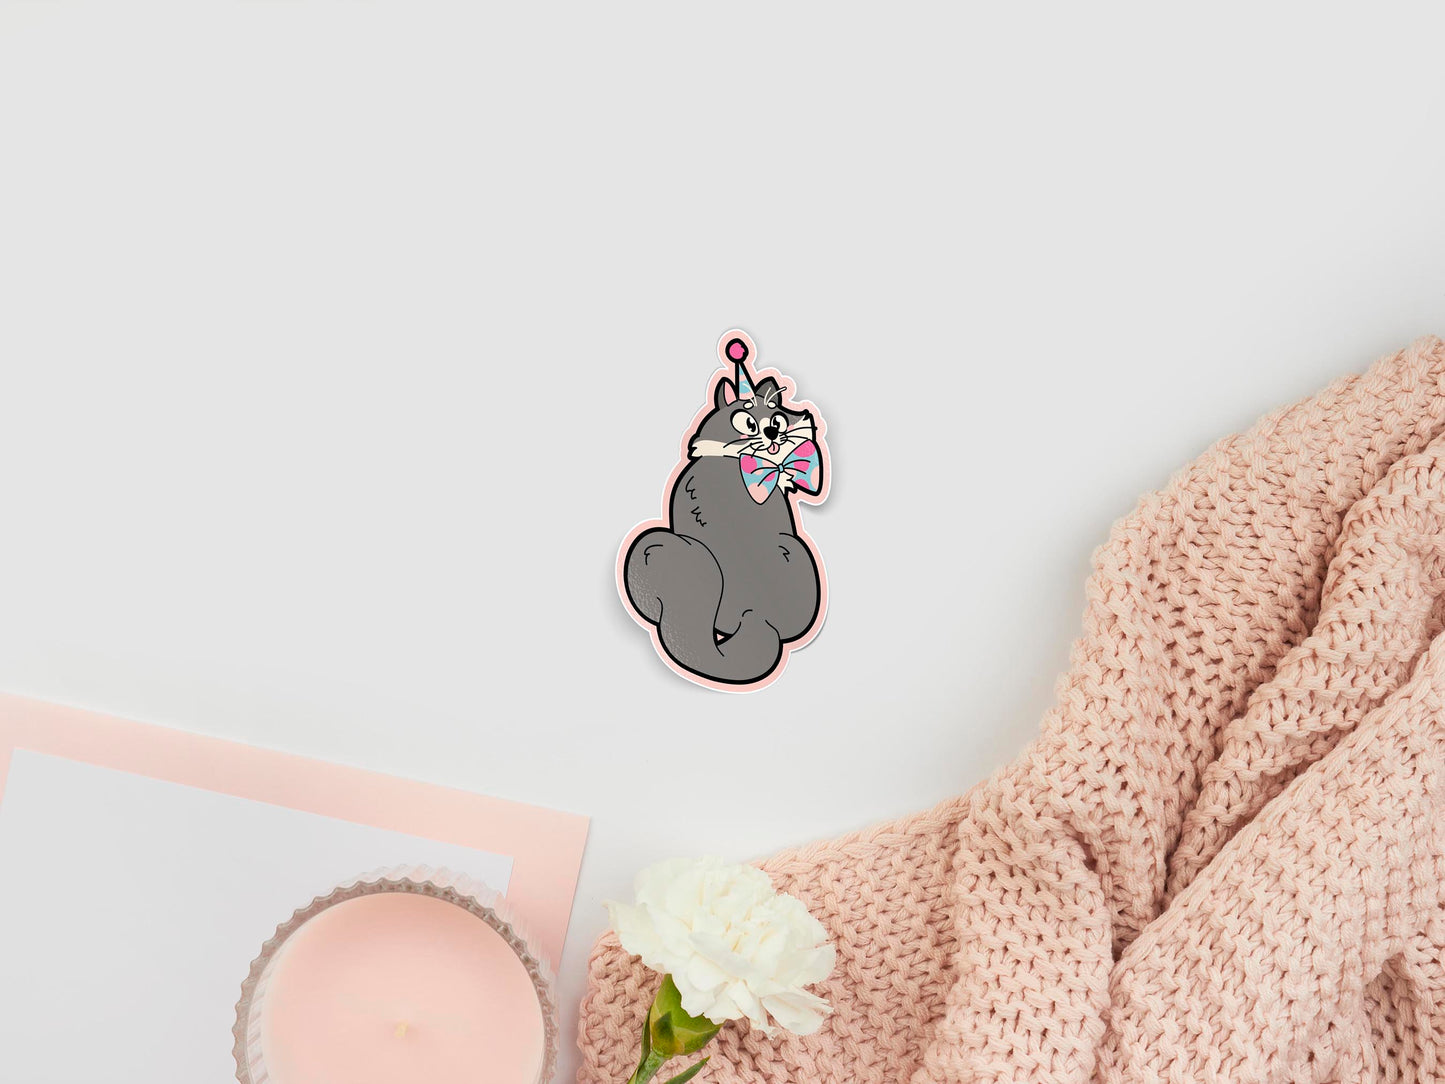 Large sticker of digital illustration cartoon of a cute grey cat with it's tongue cheekily pocking out its mouth, in a blue and pink spotted party hat and bow tie